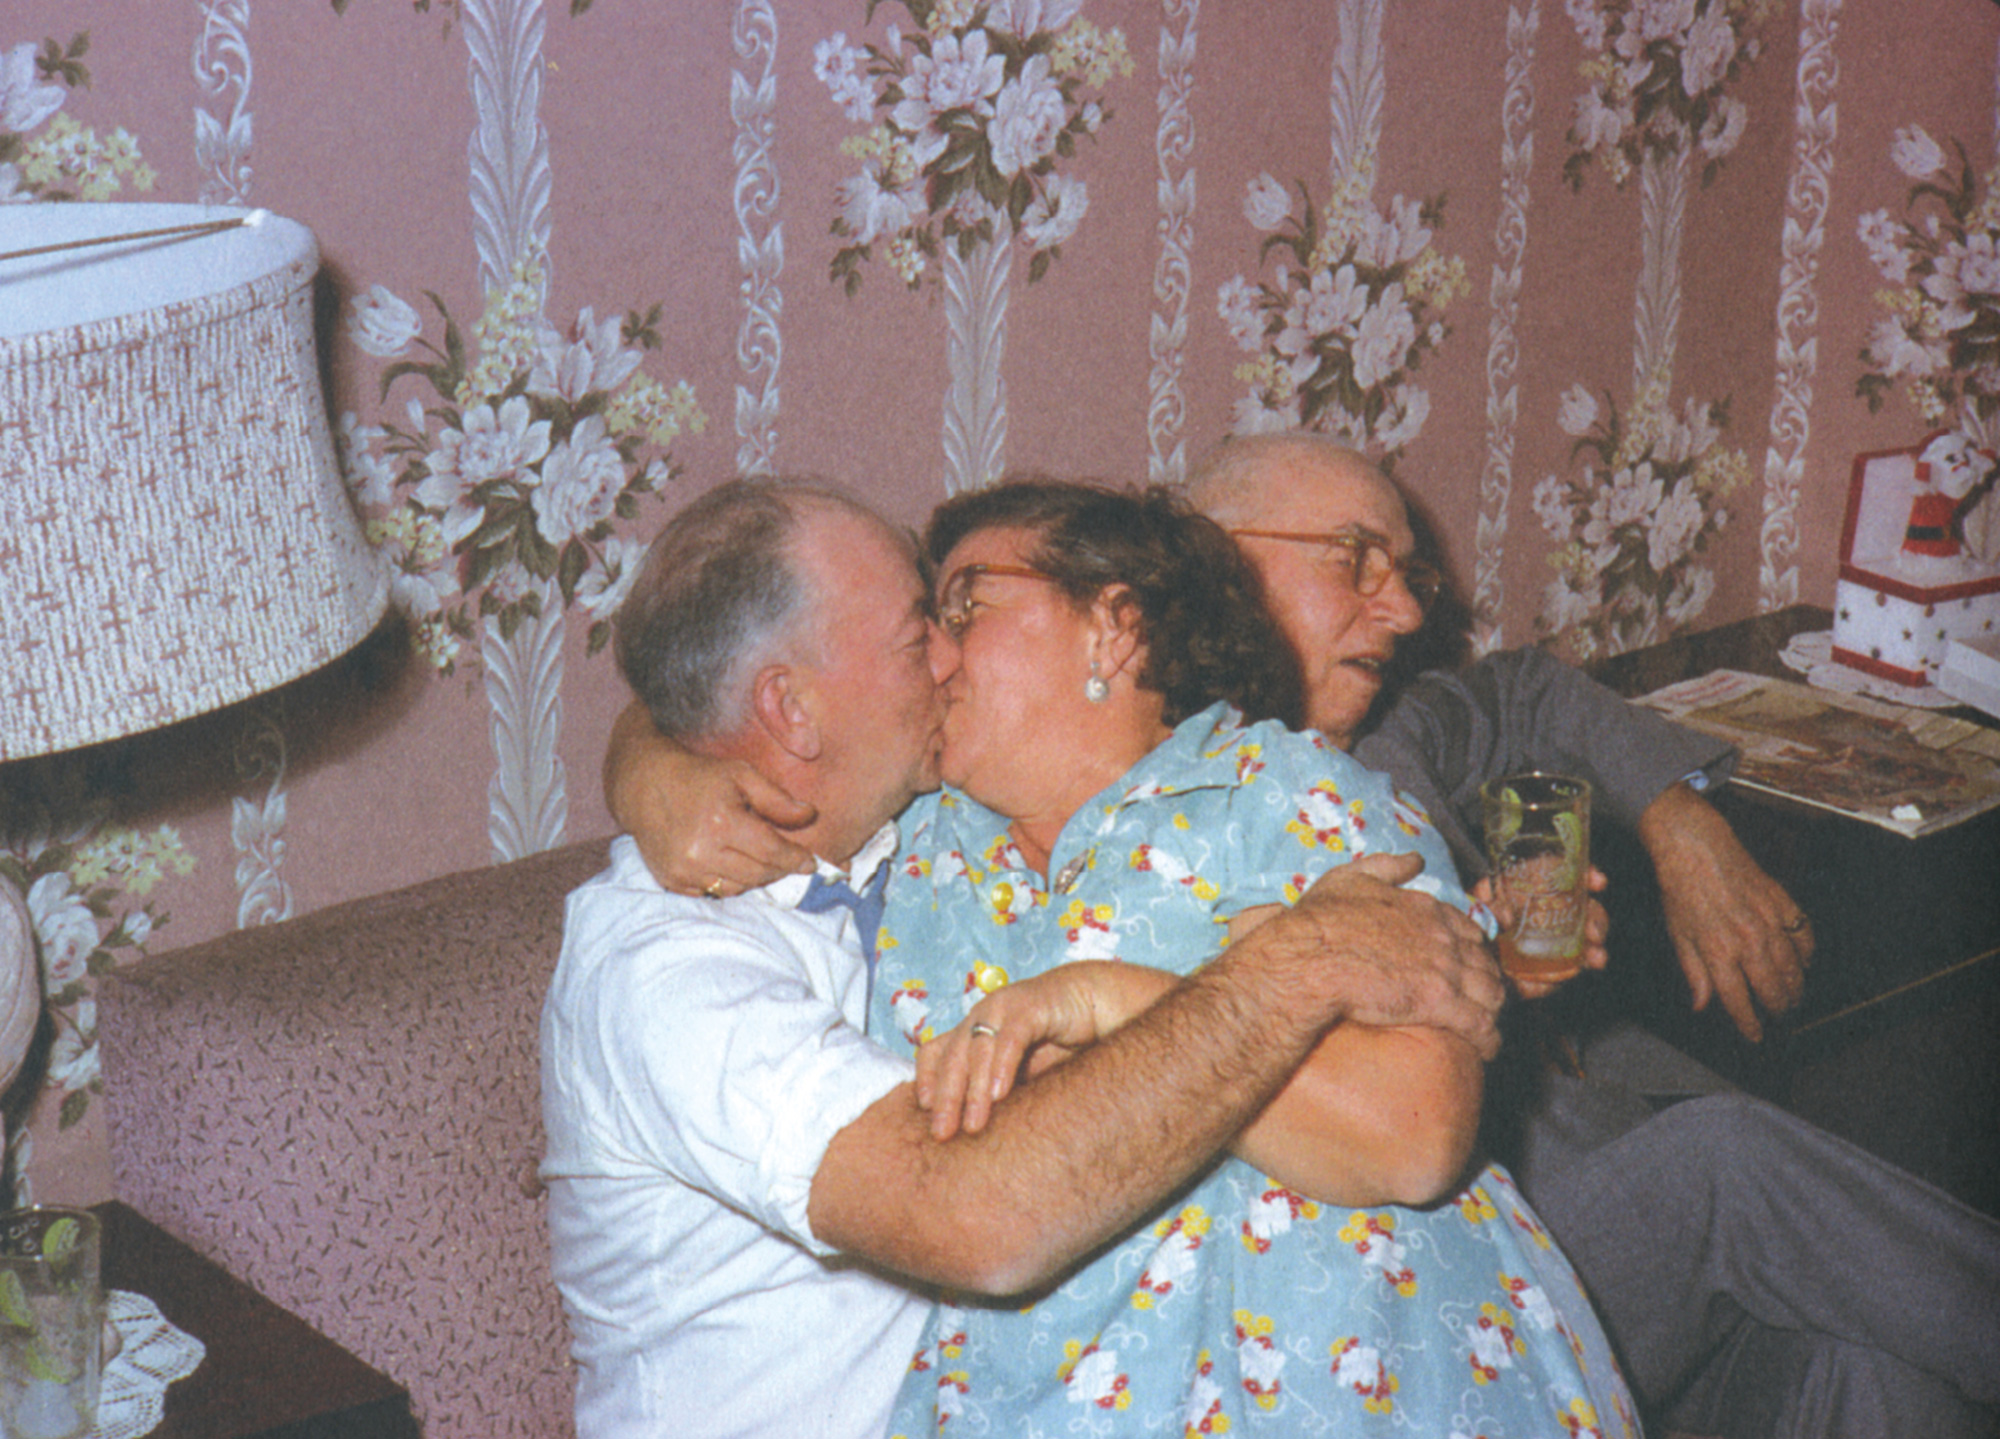 A photograph of an elderly man sitting on a couch, almost crushed by a couple who are passionately kissing directly beside him.